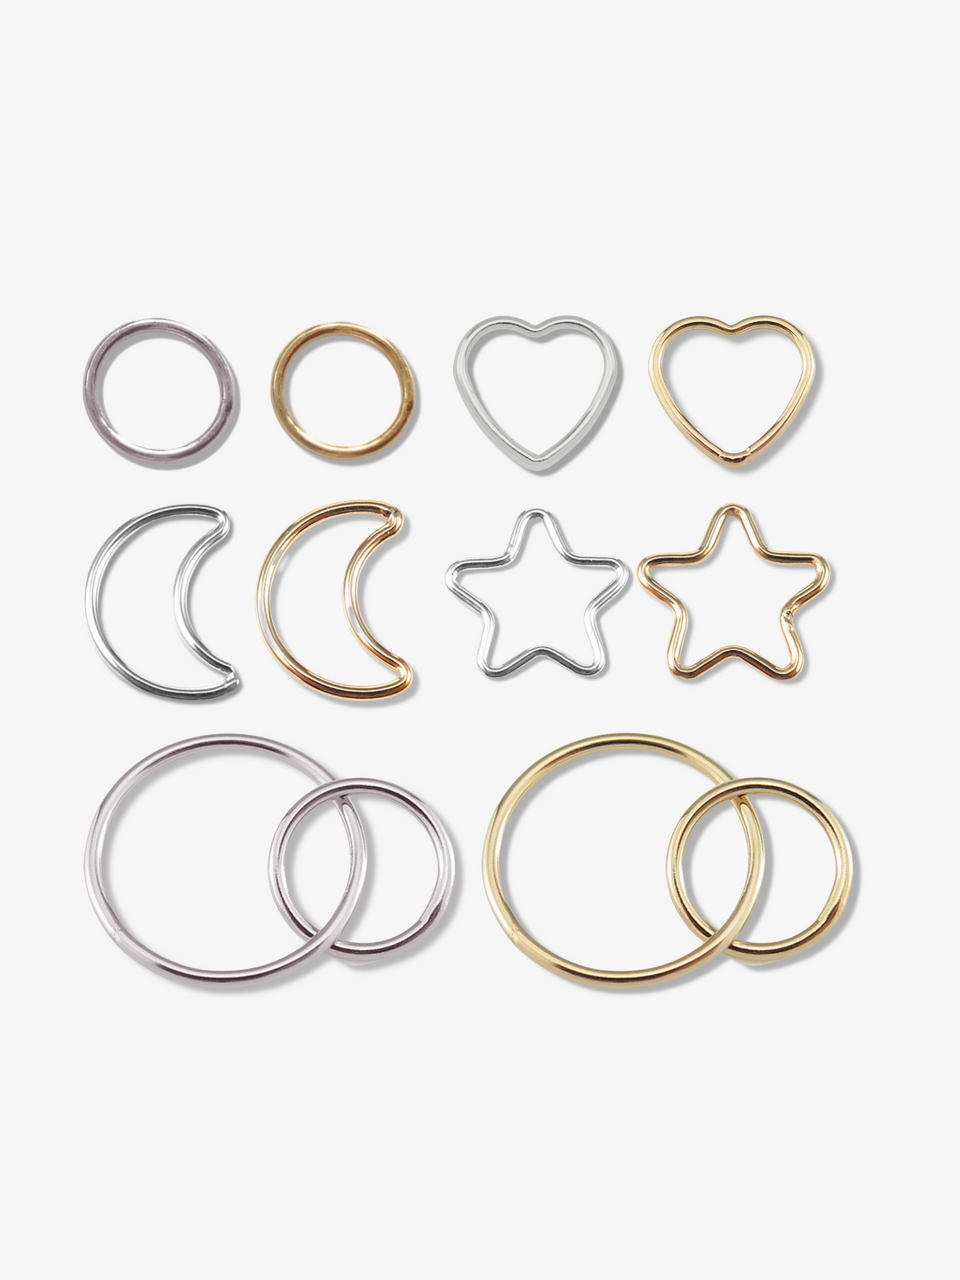 14K Gold Filled and Sterling Silver Connector Charms 5 Style options Set of 5 Montana Infinity Circles 14K Gold Filled